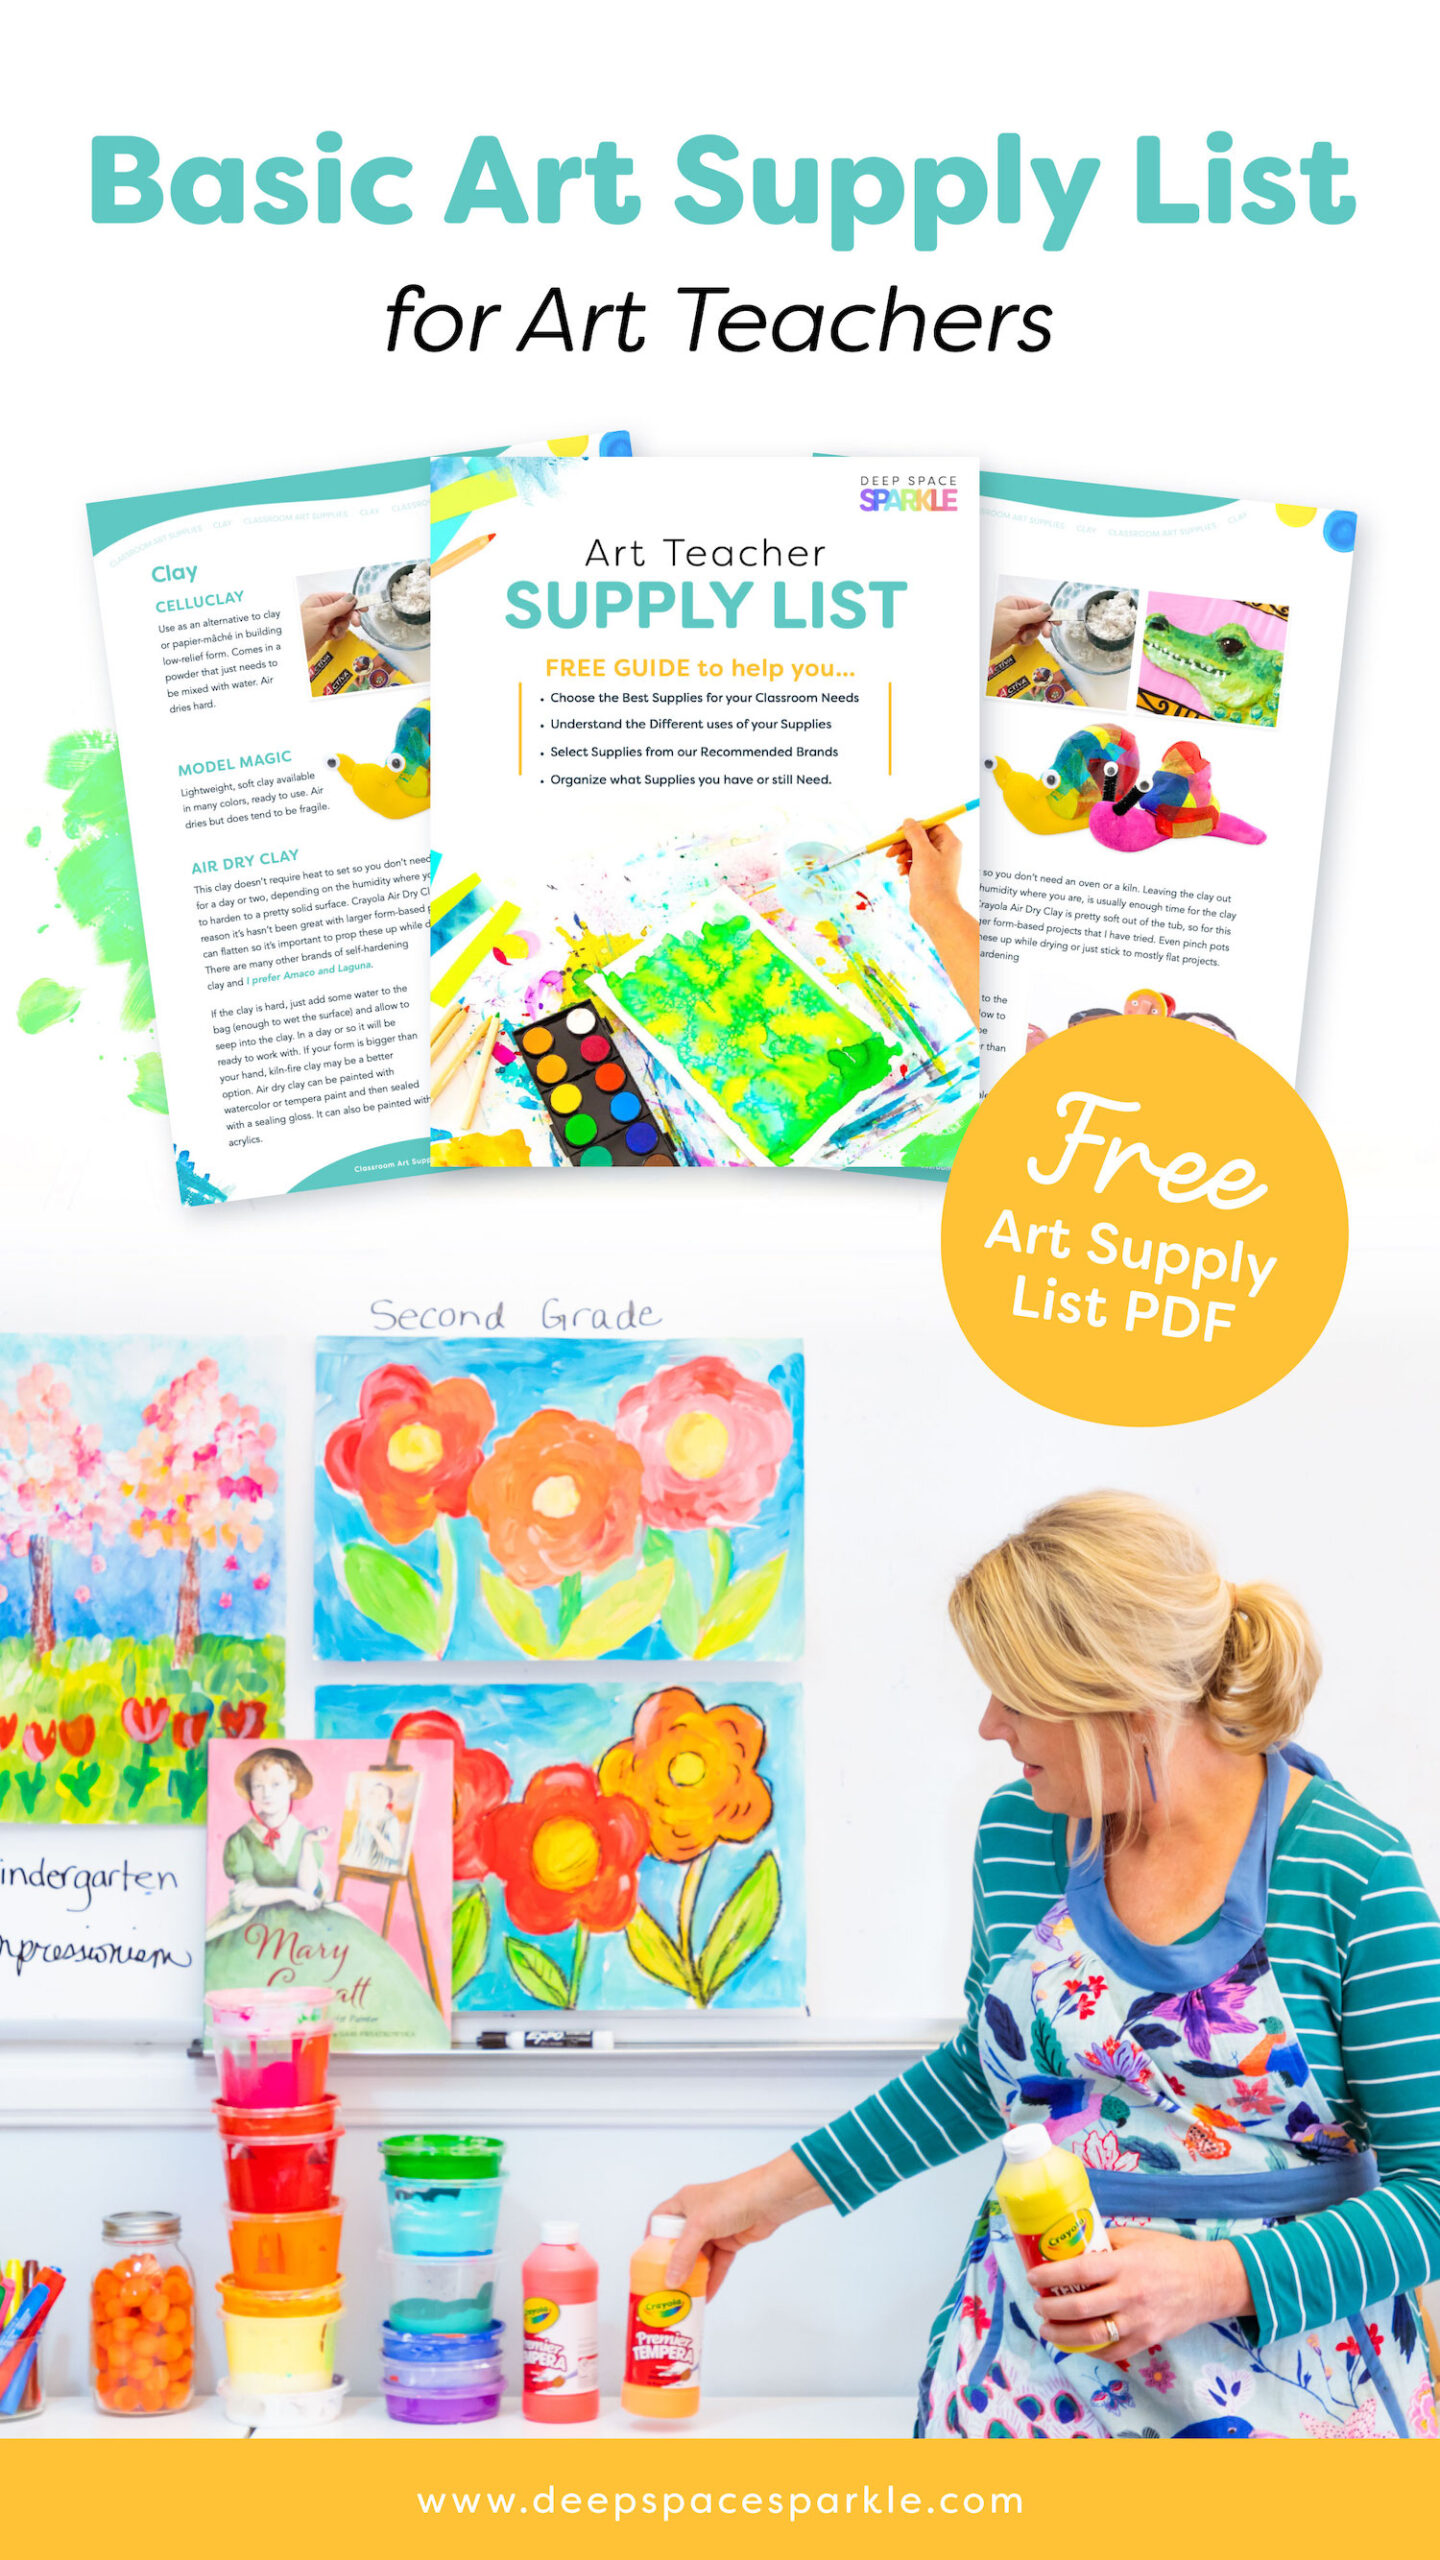 Basic Art Supply List for Art Teachers and a free guide of the best art supplies for your classroom needs